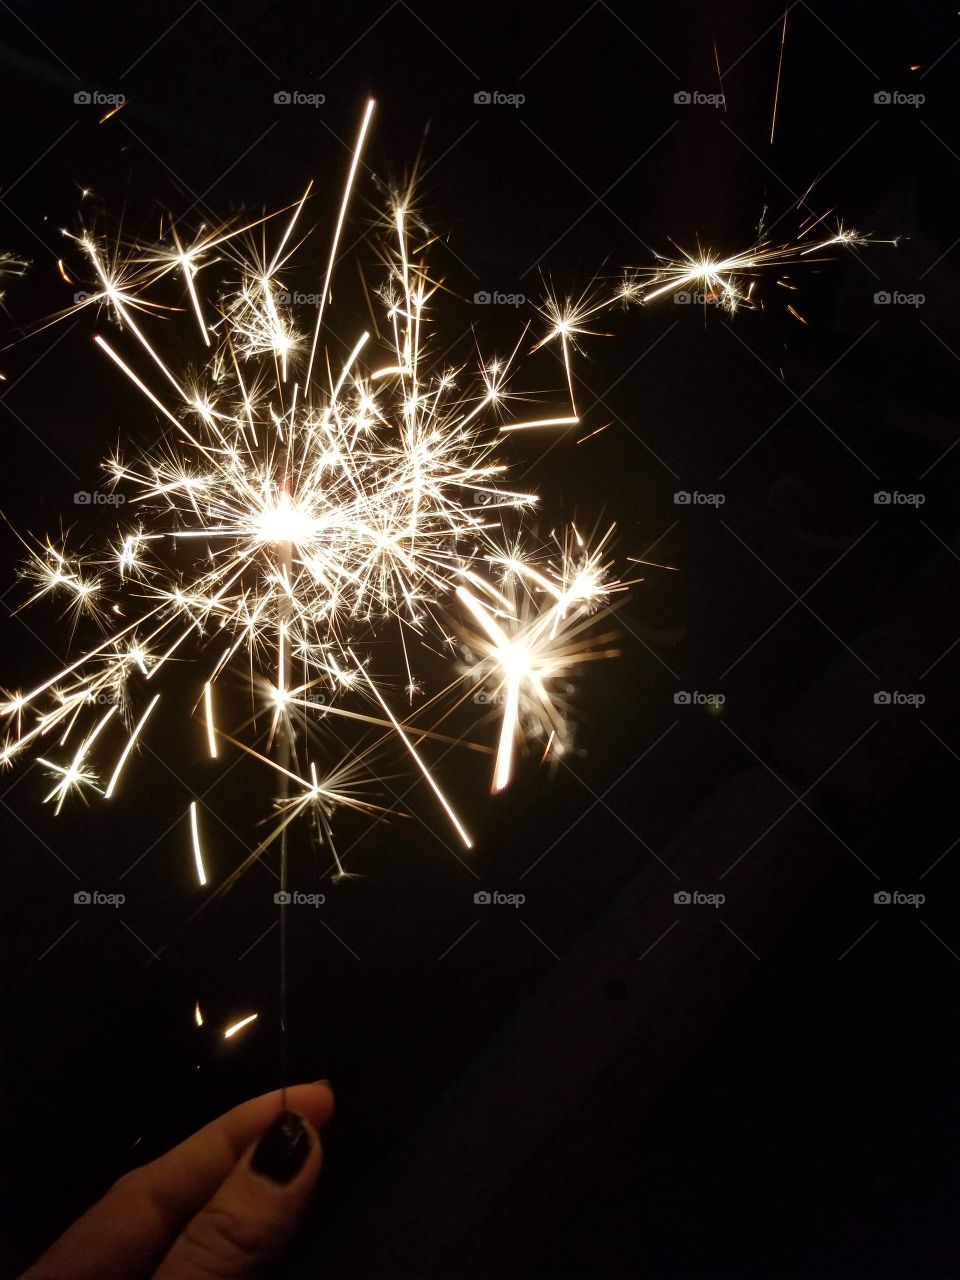 Sparks from firecrackers. Love it in the night time